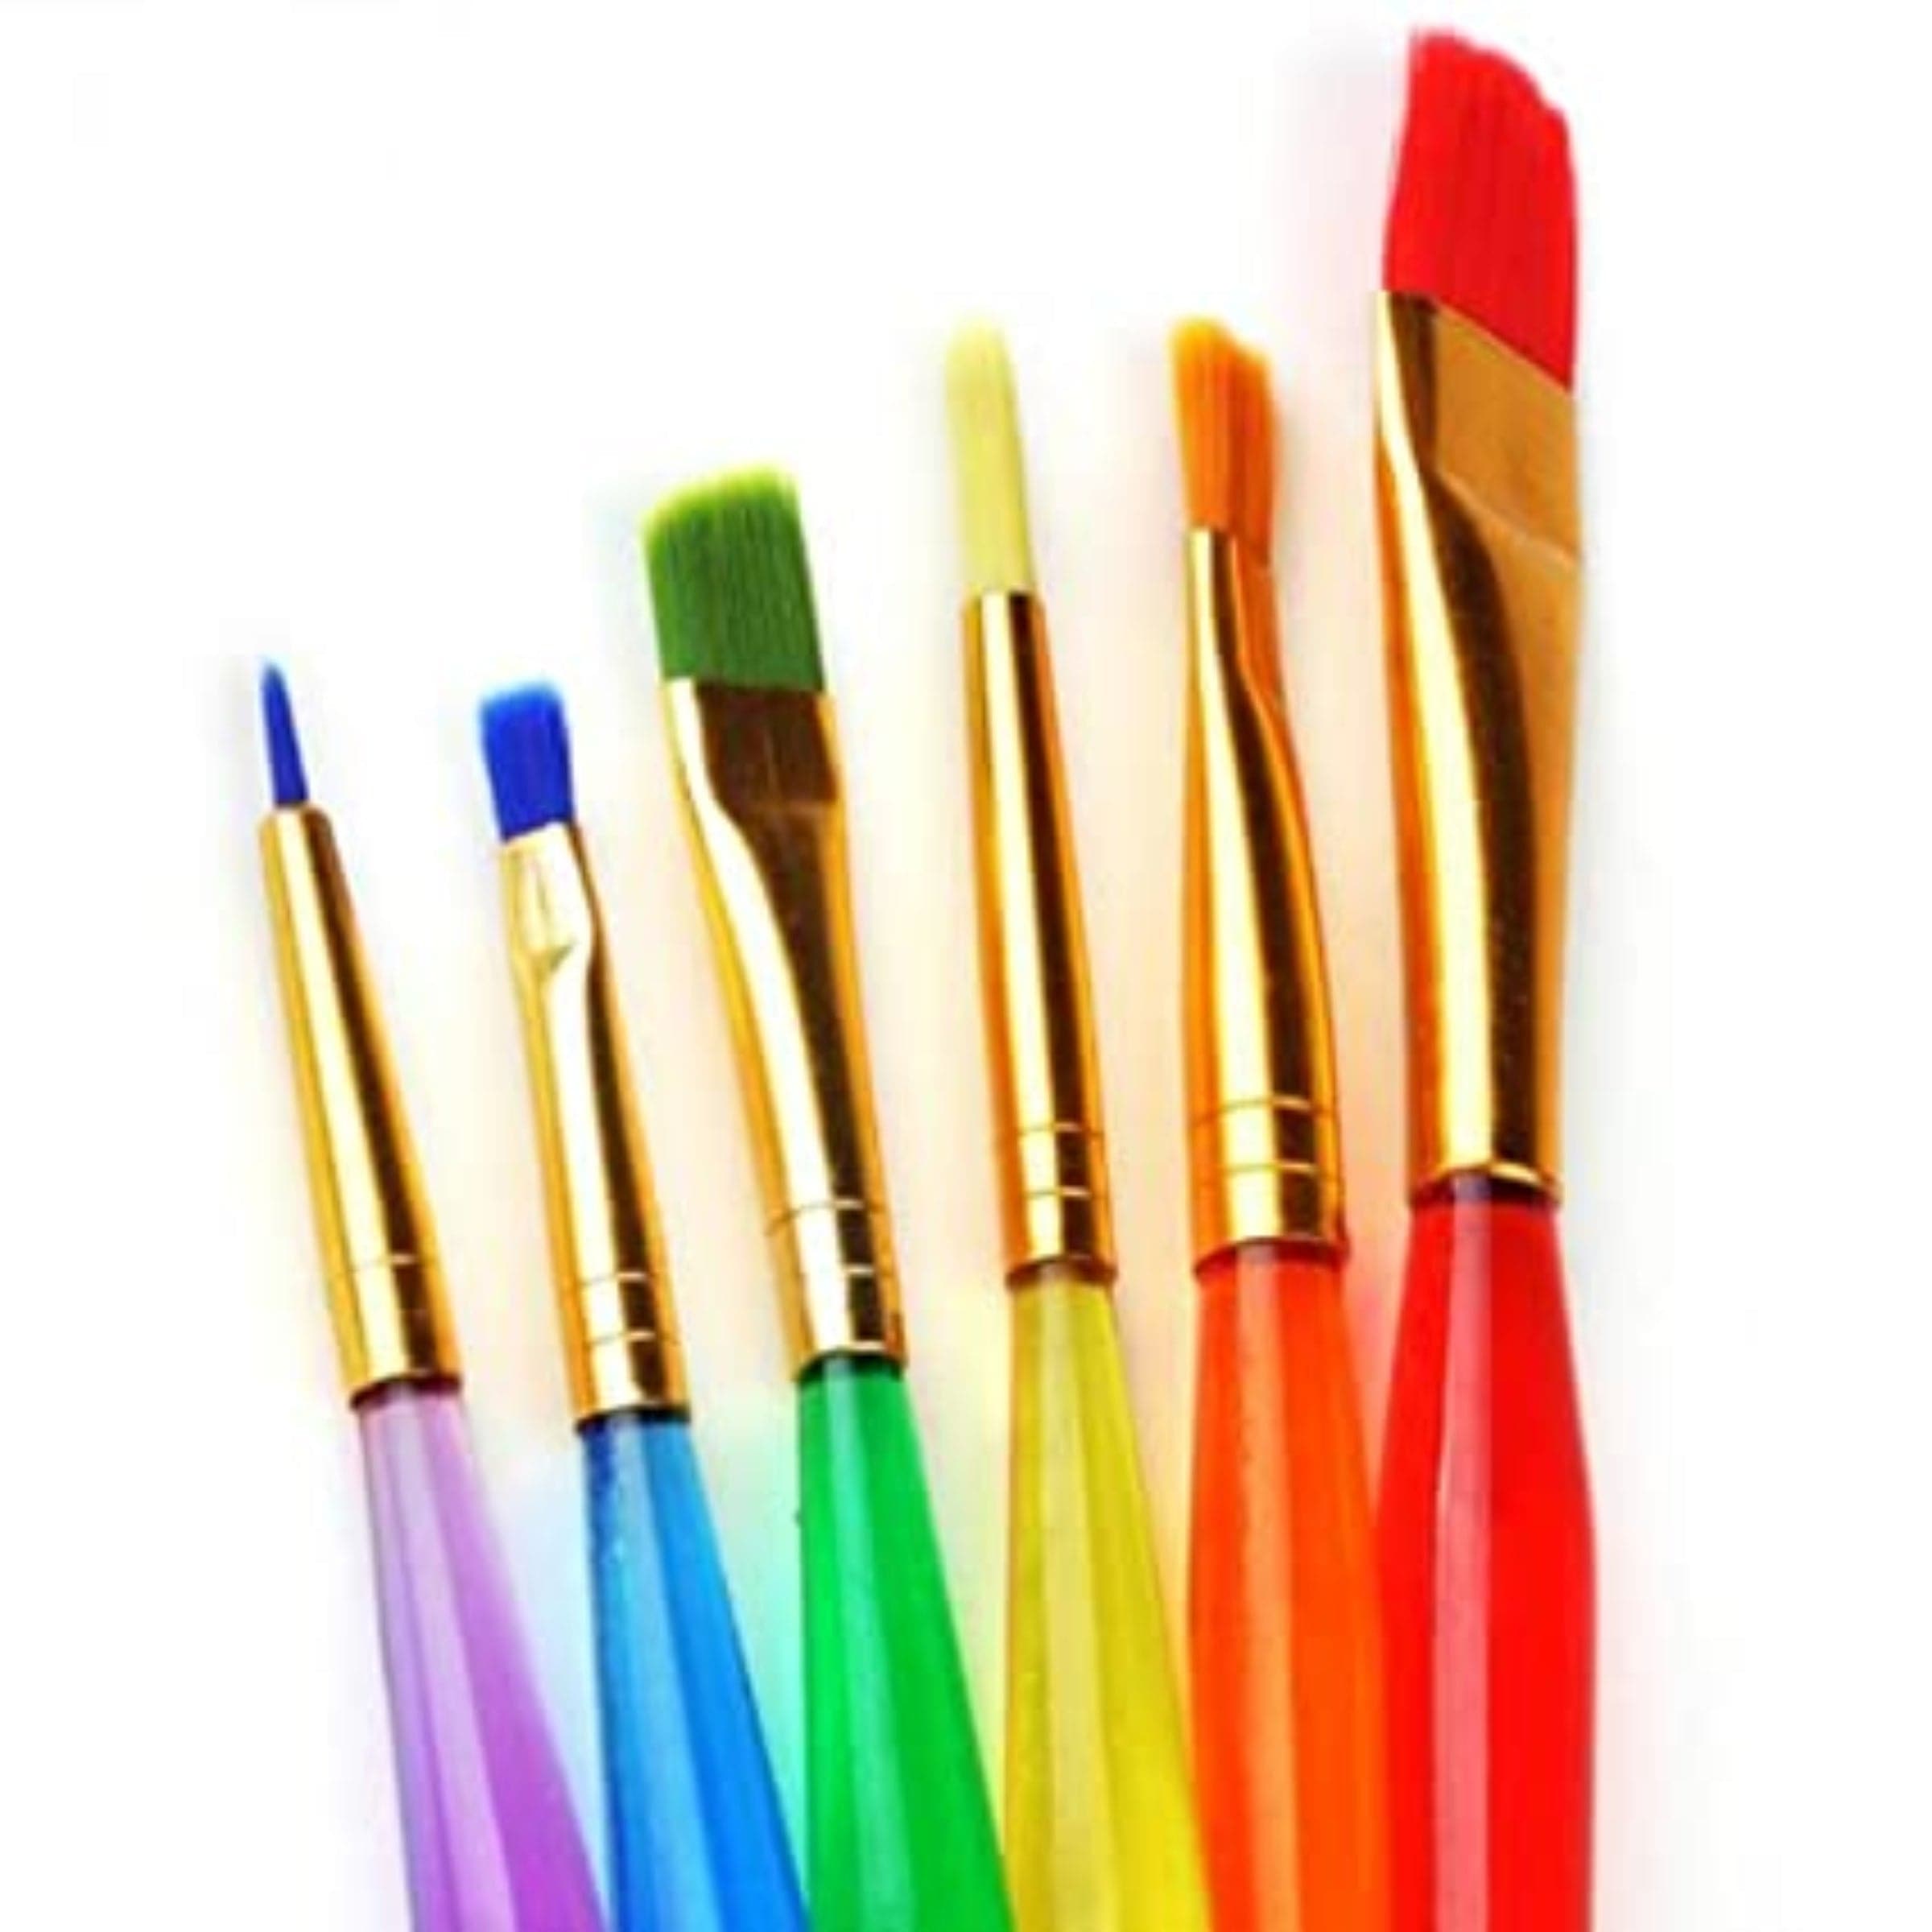 Keep Smiling Paint Palette Set With Brushes & Palette Knife  ( 7Pcs )